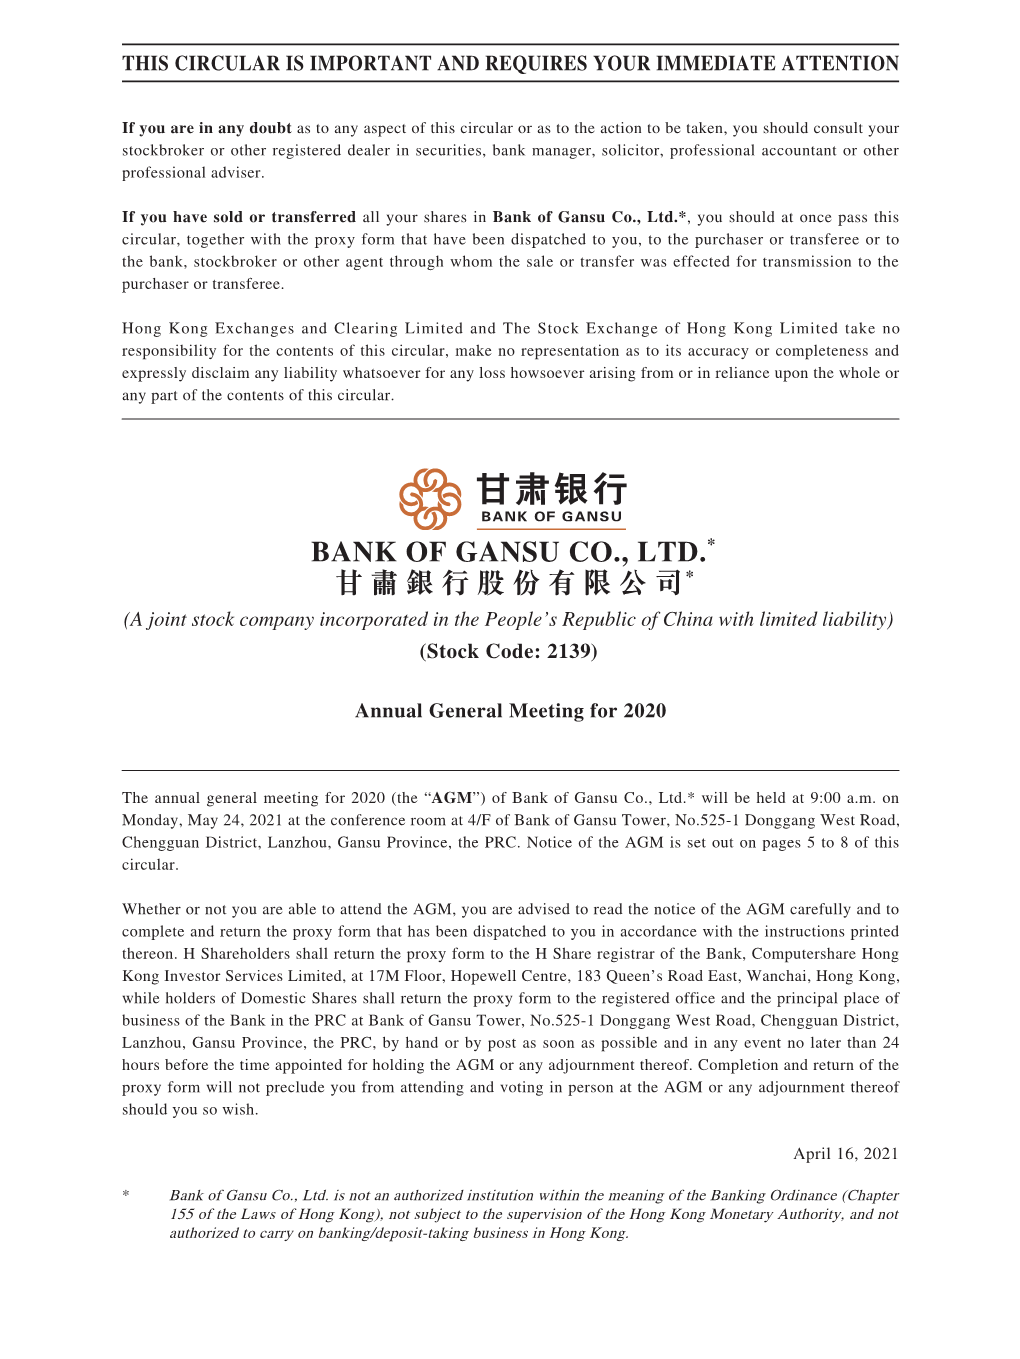 BANK of GANSU CO., LTD.* 甘肅銀行股份有限公司 * (A Joint Stock Company Incorporated in the People’S Republic of China with Limited Liability) (Stock Code: 2139)